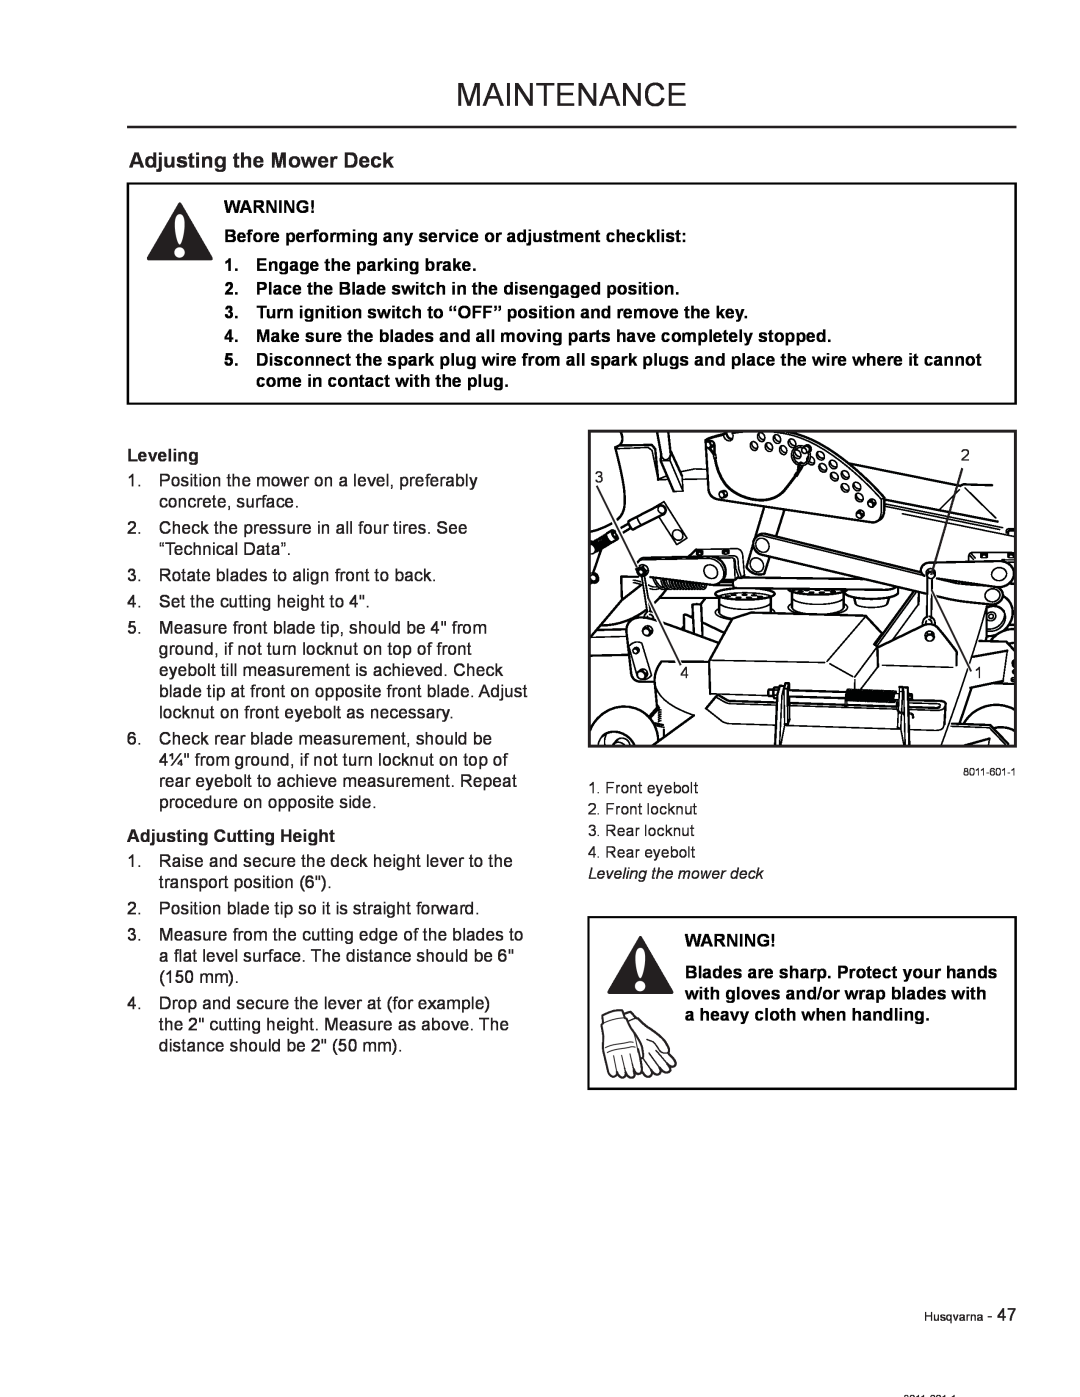 HTC LZC5225 / 965879601 manual Adjusting the Mower Deck, Engage the parking brake, Leveling, Adjusting Cutting Height 